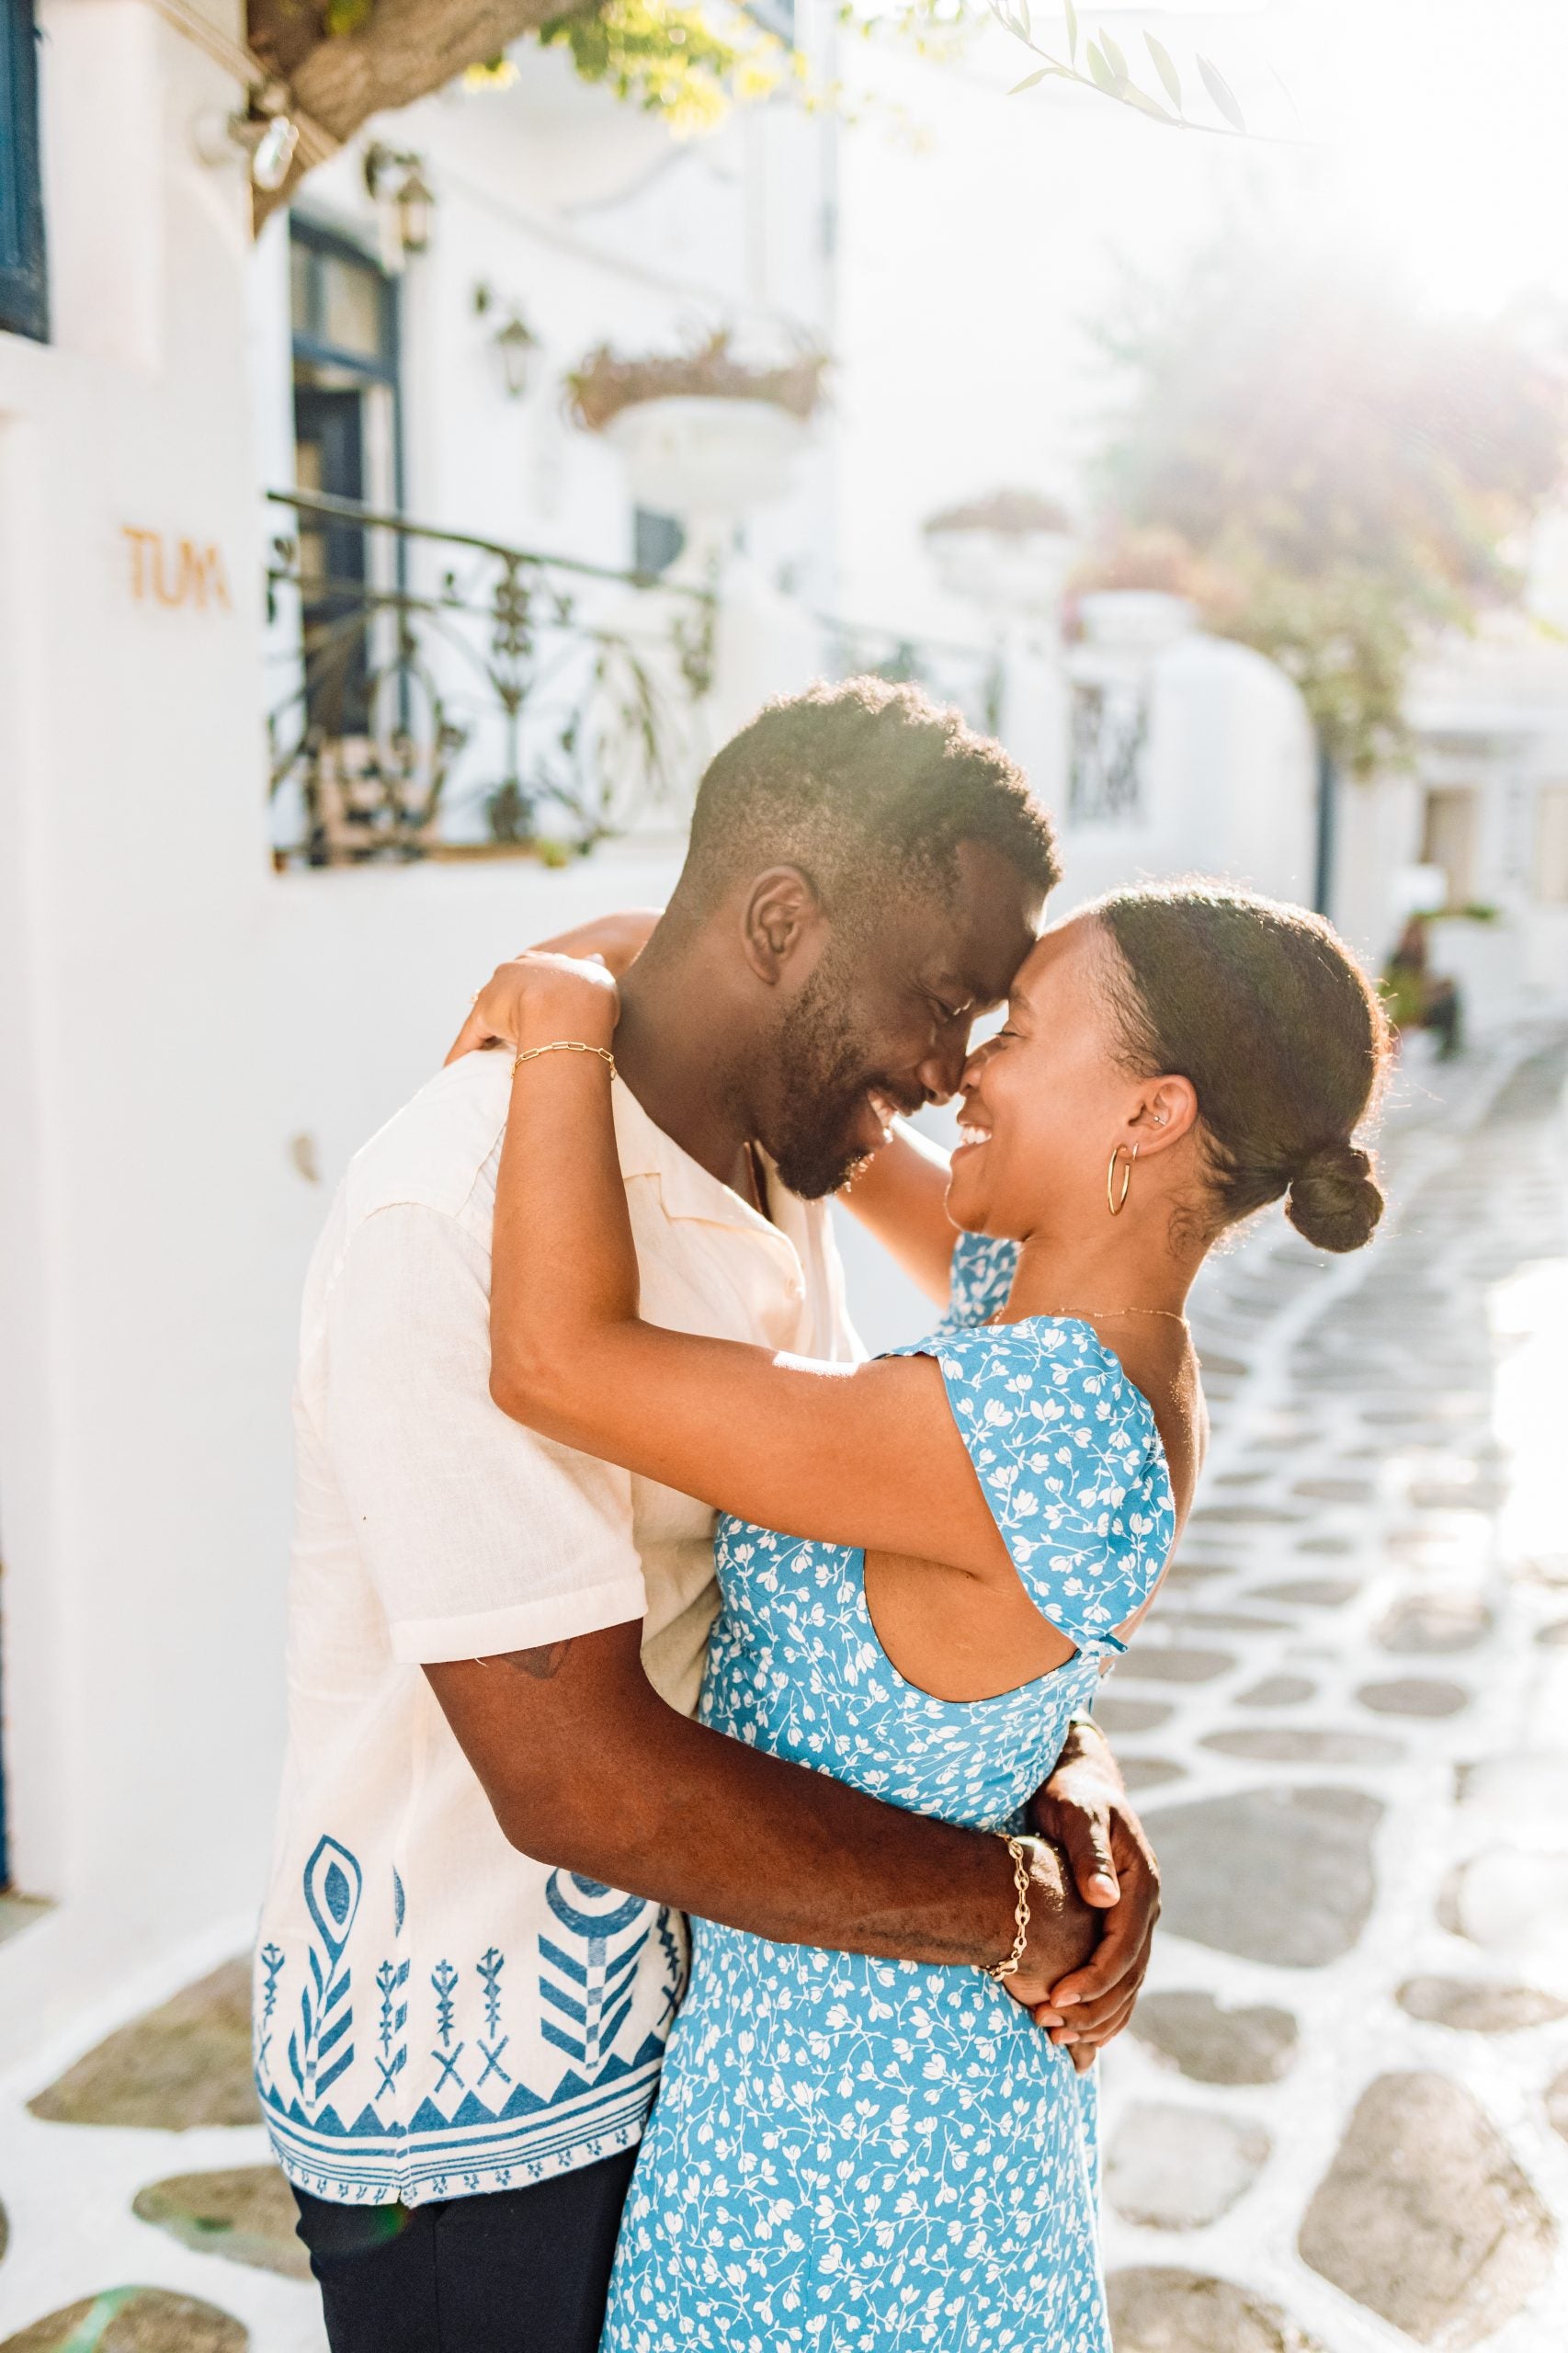 'Insecure' And 'Send Help' Star Jean Elie Is Engaged! Meet His Fiancée And See Their Stunning Grecian Engagement Shoot